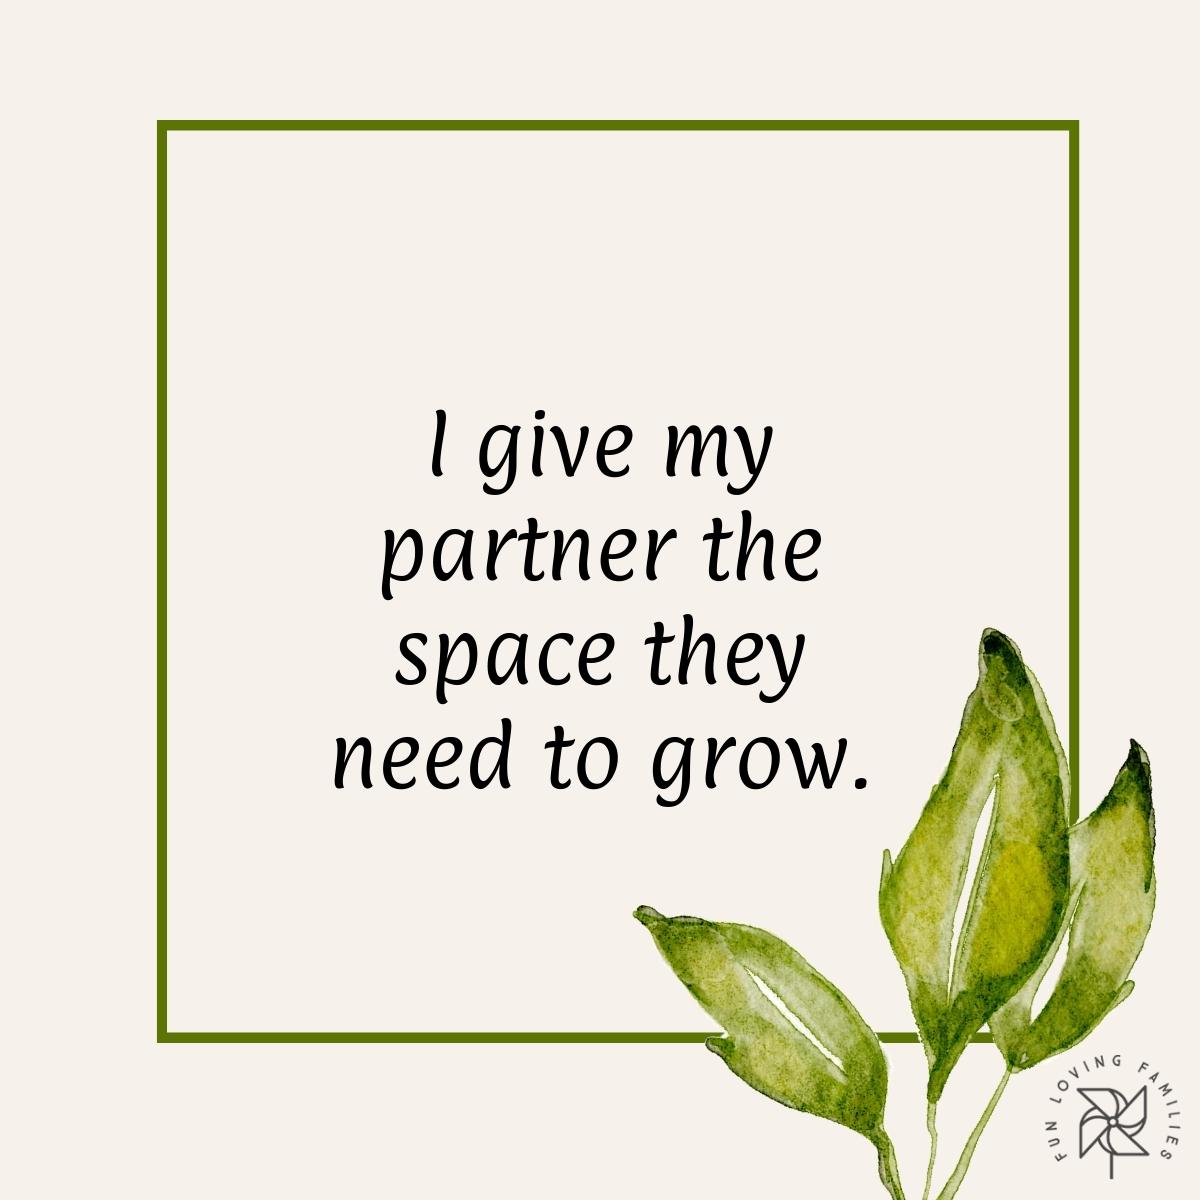 I give my partner the space they need to grow affirmation